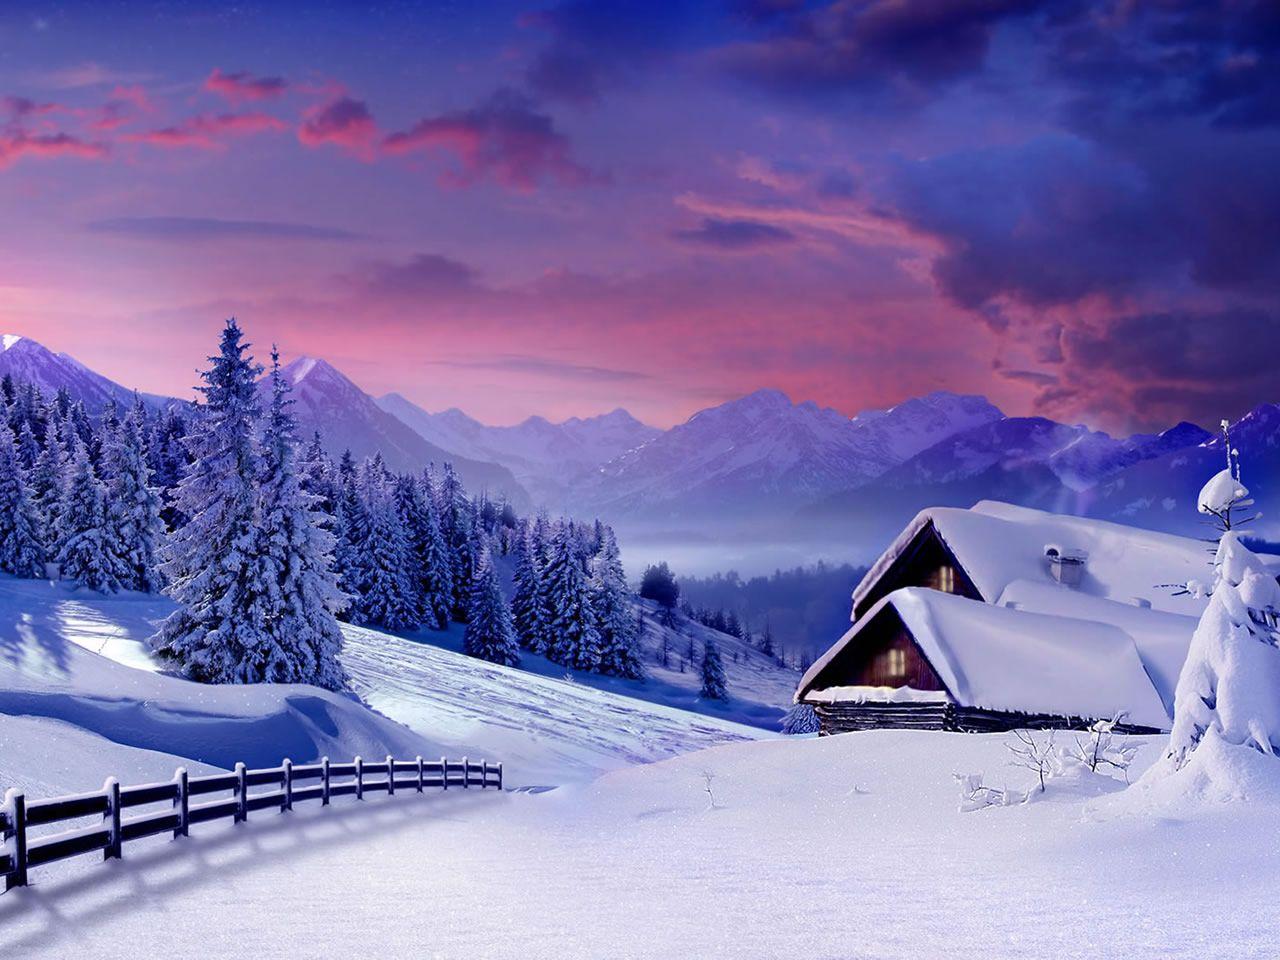 Pink Sunset Wallpaper Winter Cabins Fence Pines Purple Sky Snow. Winter landscape, Winter picture, Winter scenery